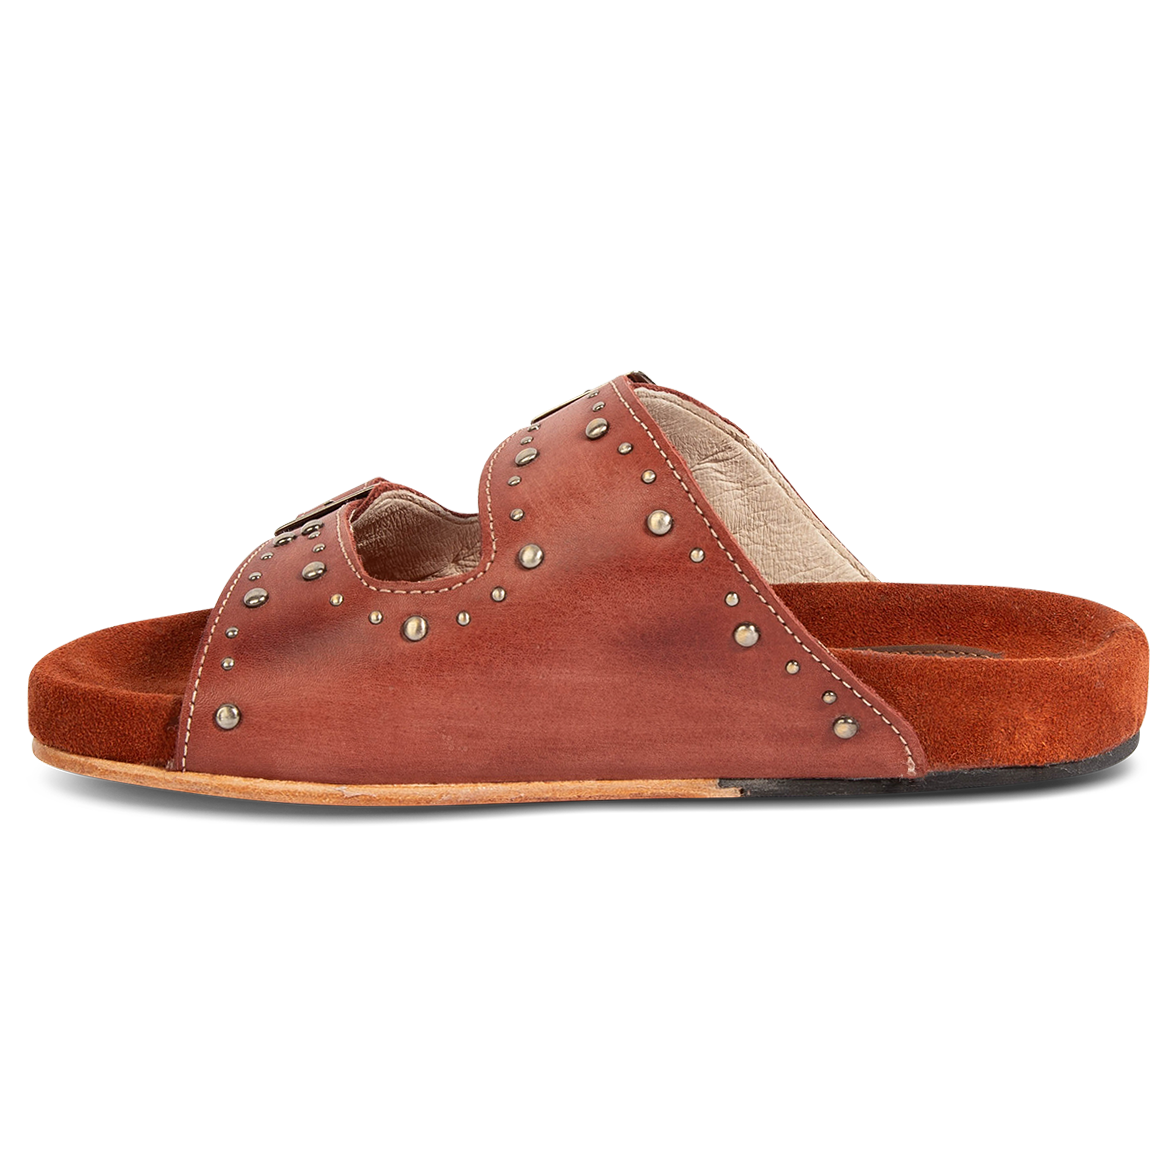 Inside view showing FREEBIRD women's Asher rust sandal with adjustable belt buckles, a suede footbed and silver embellishments